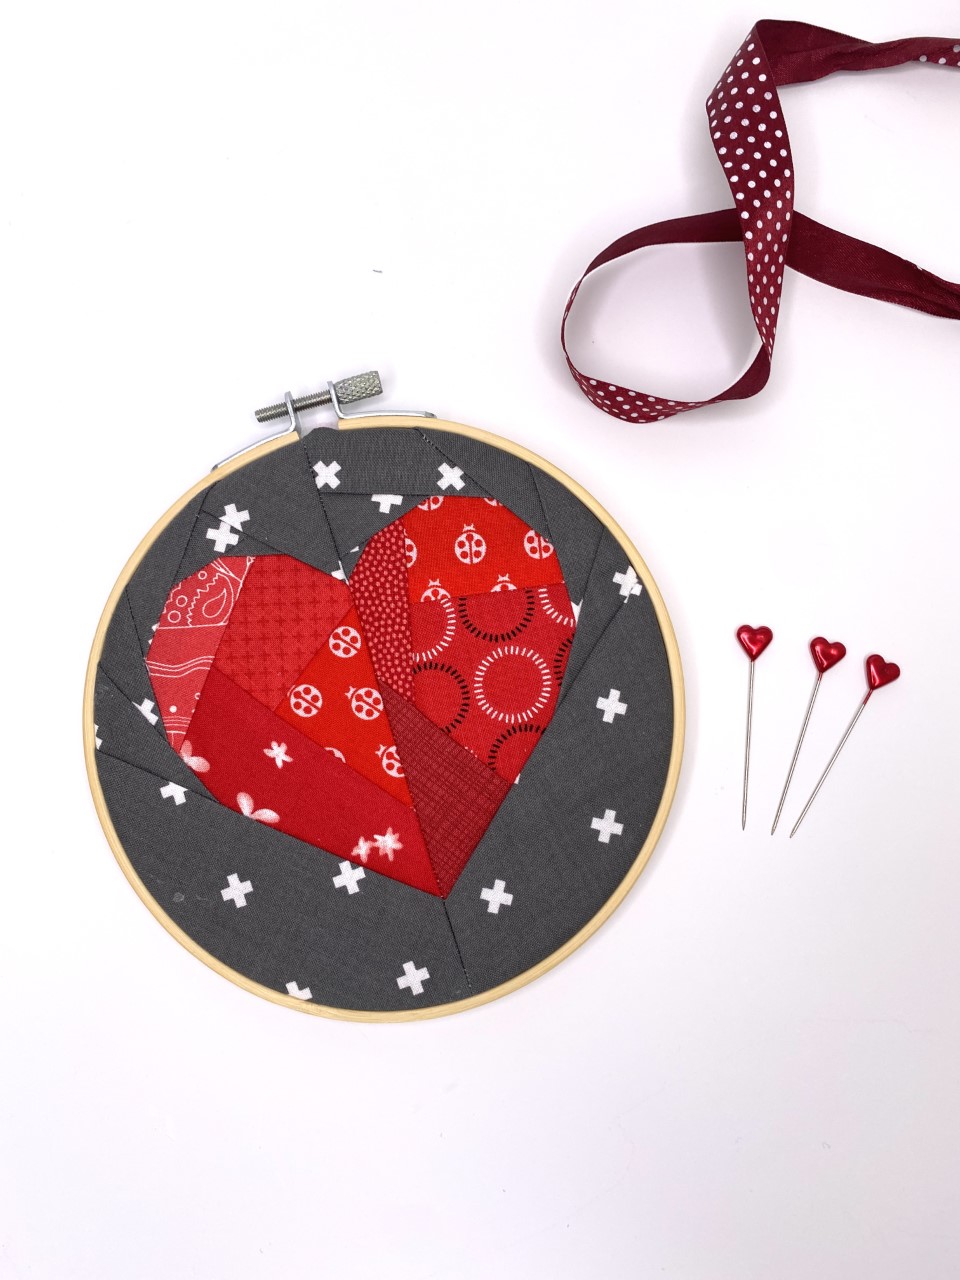 Paper Pieced Heart Quilt Block has been used to make Wall Art using an embroidery hoop in this quick and easy sewing project!